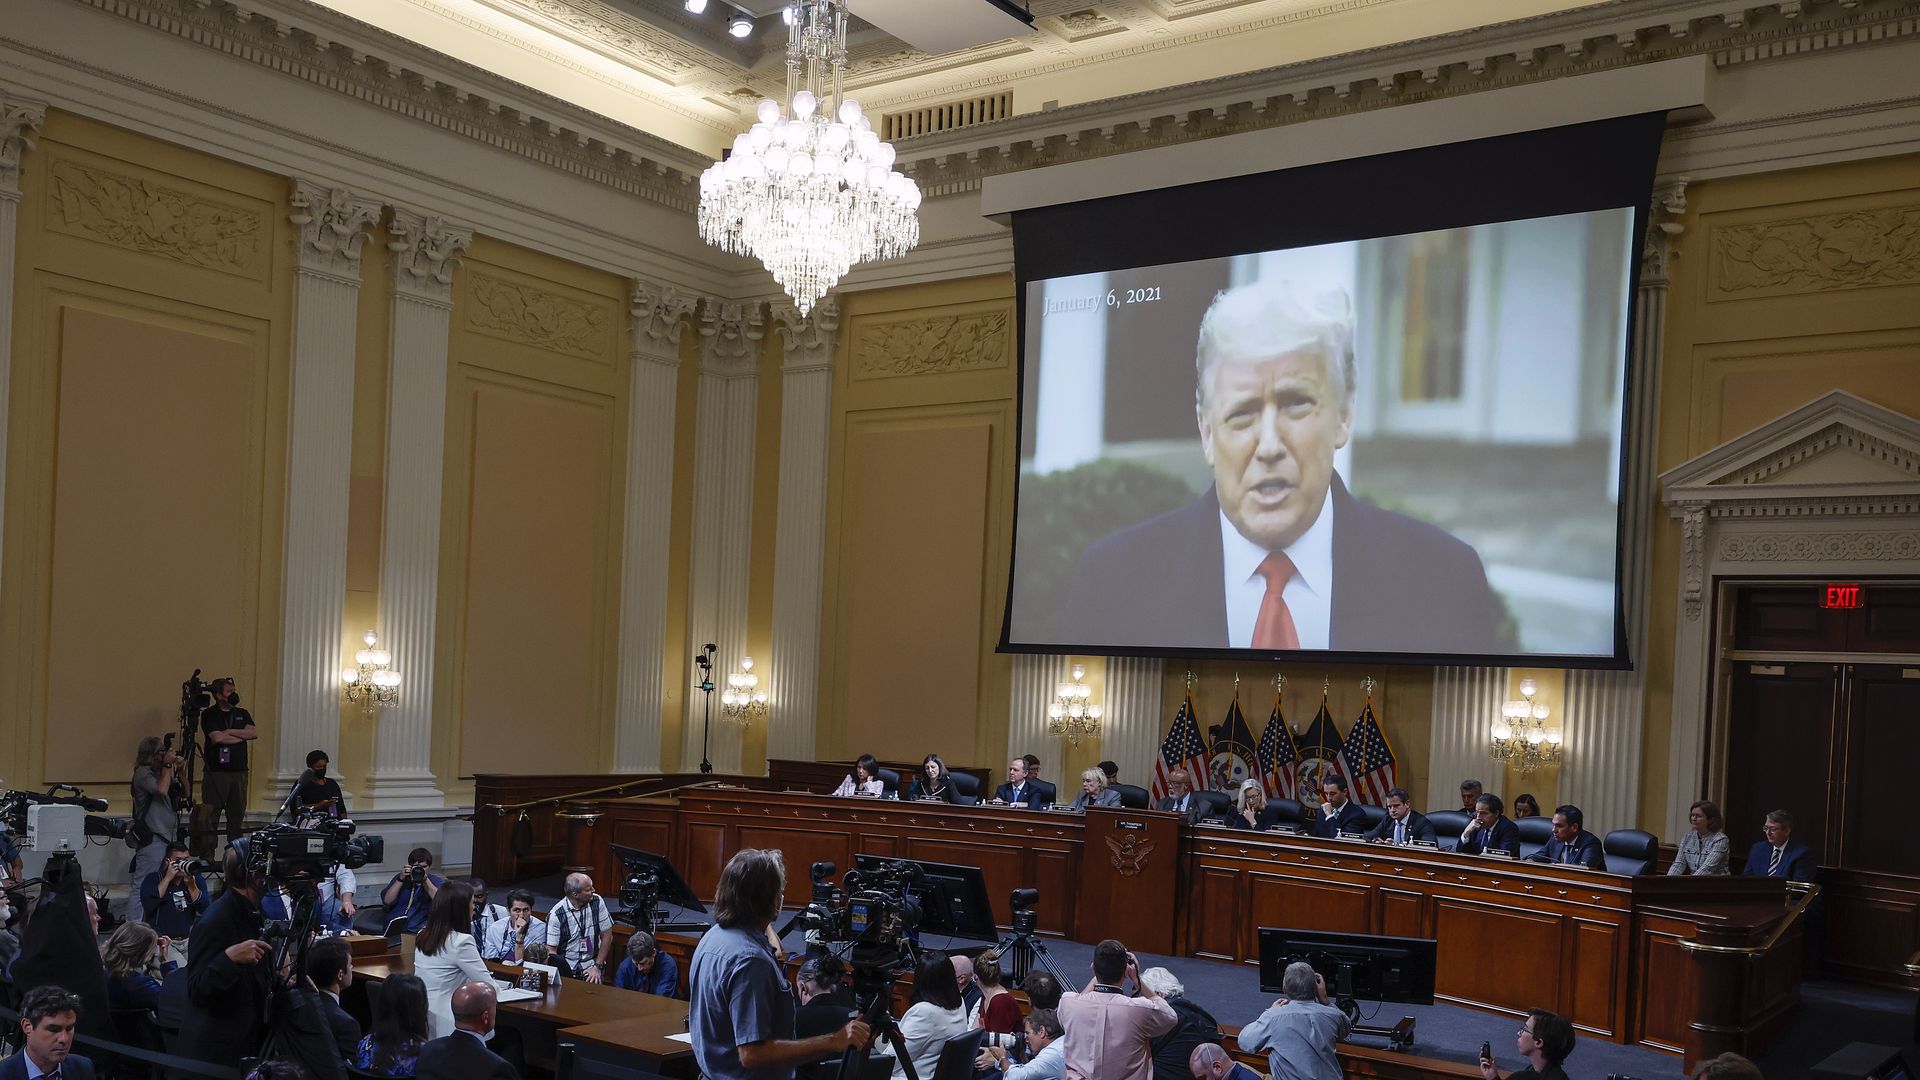 Photo of a projector showing Donald Trump on a screen that hangs over a row of Congress members sitting at the front of a hearing room